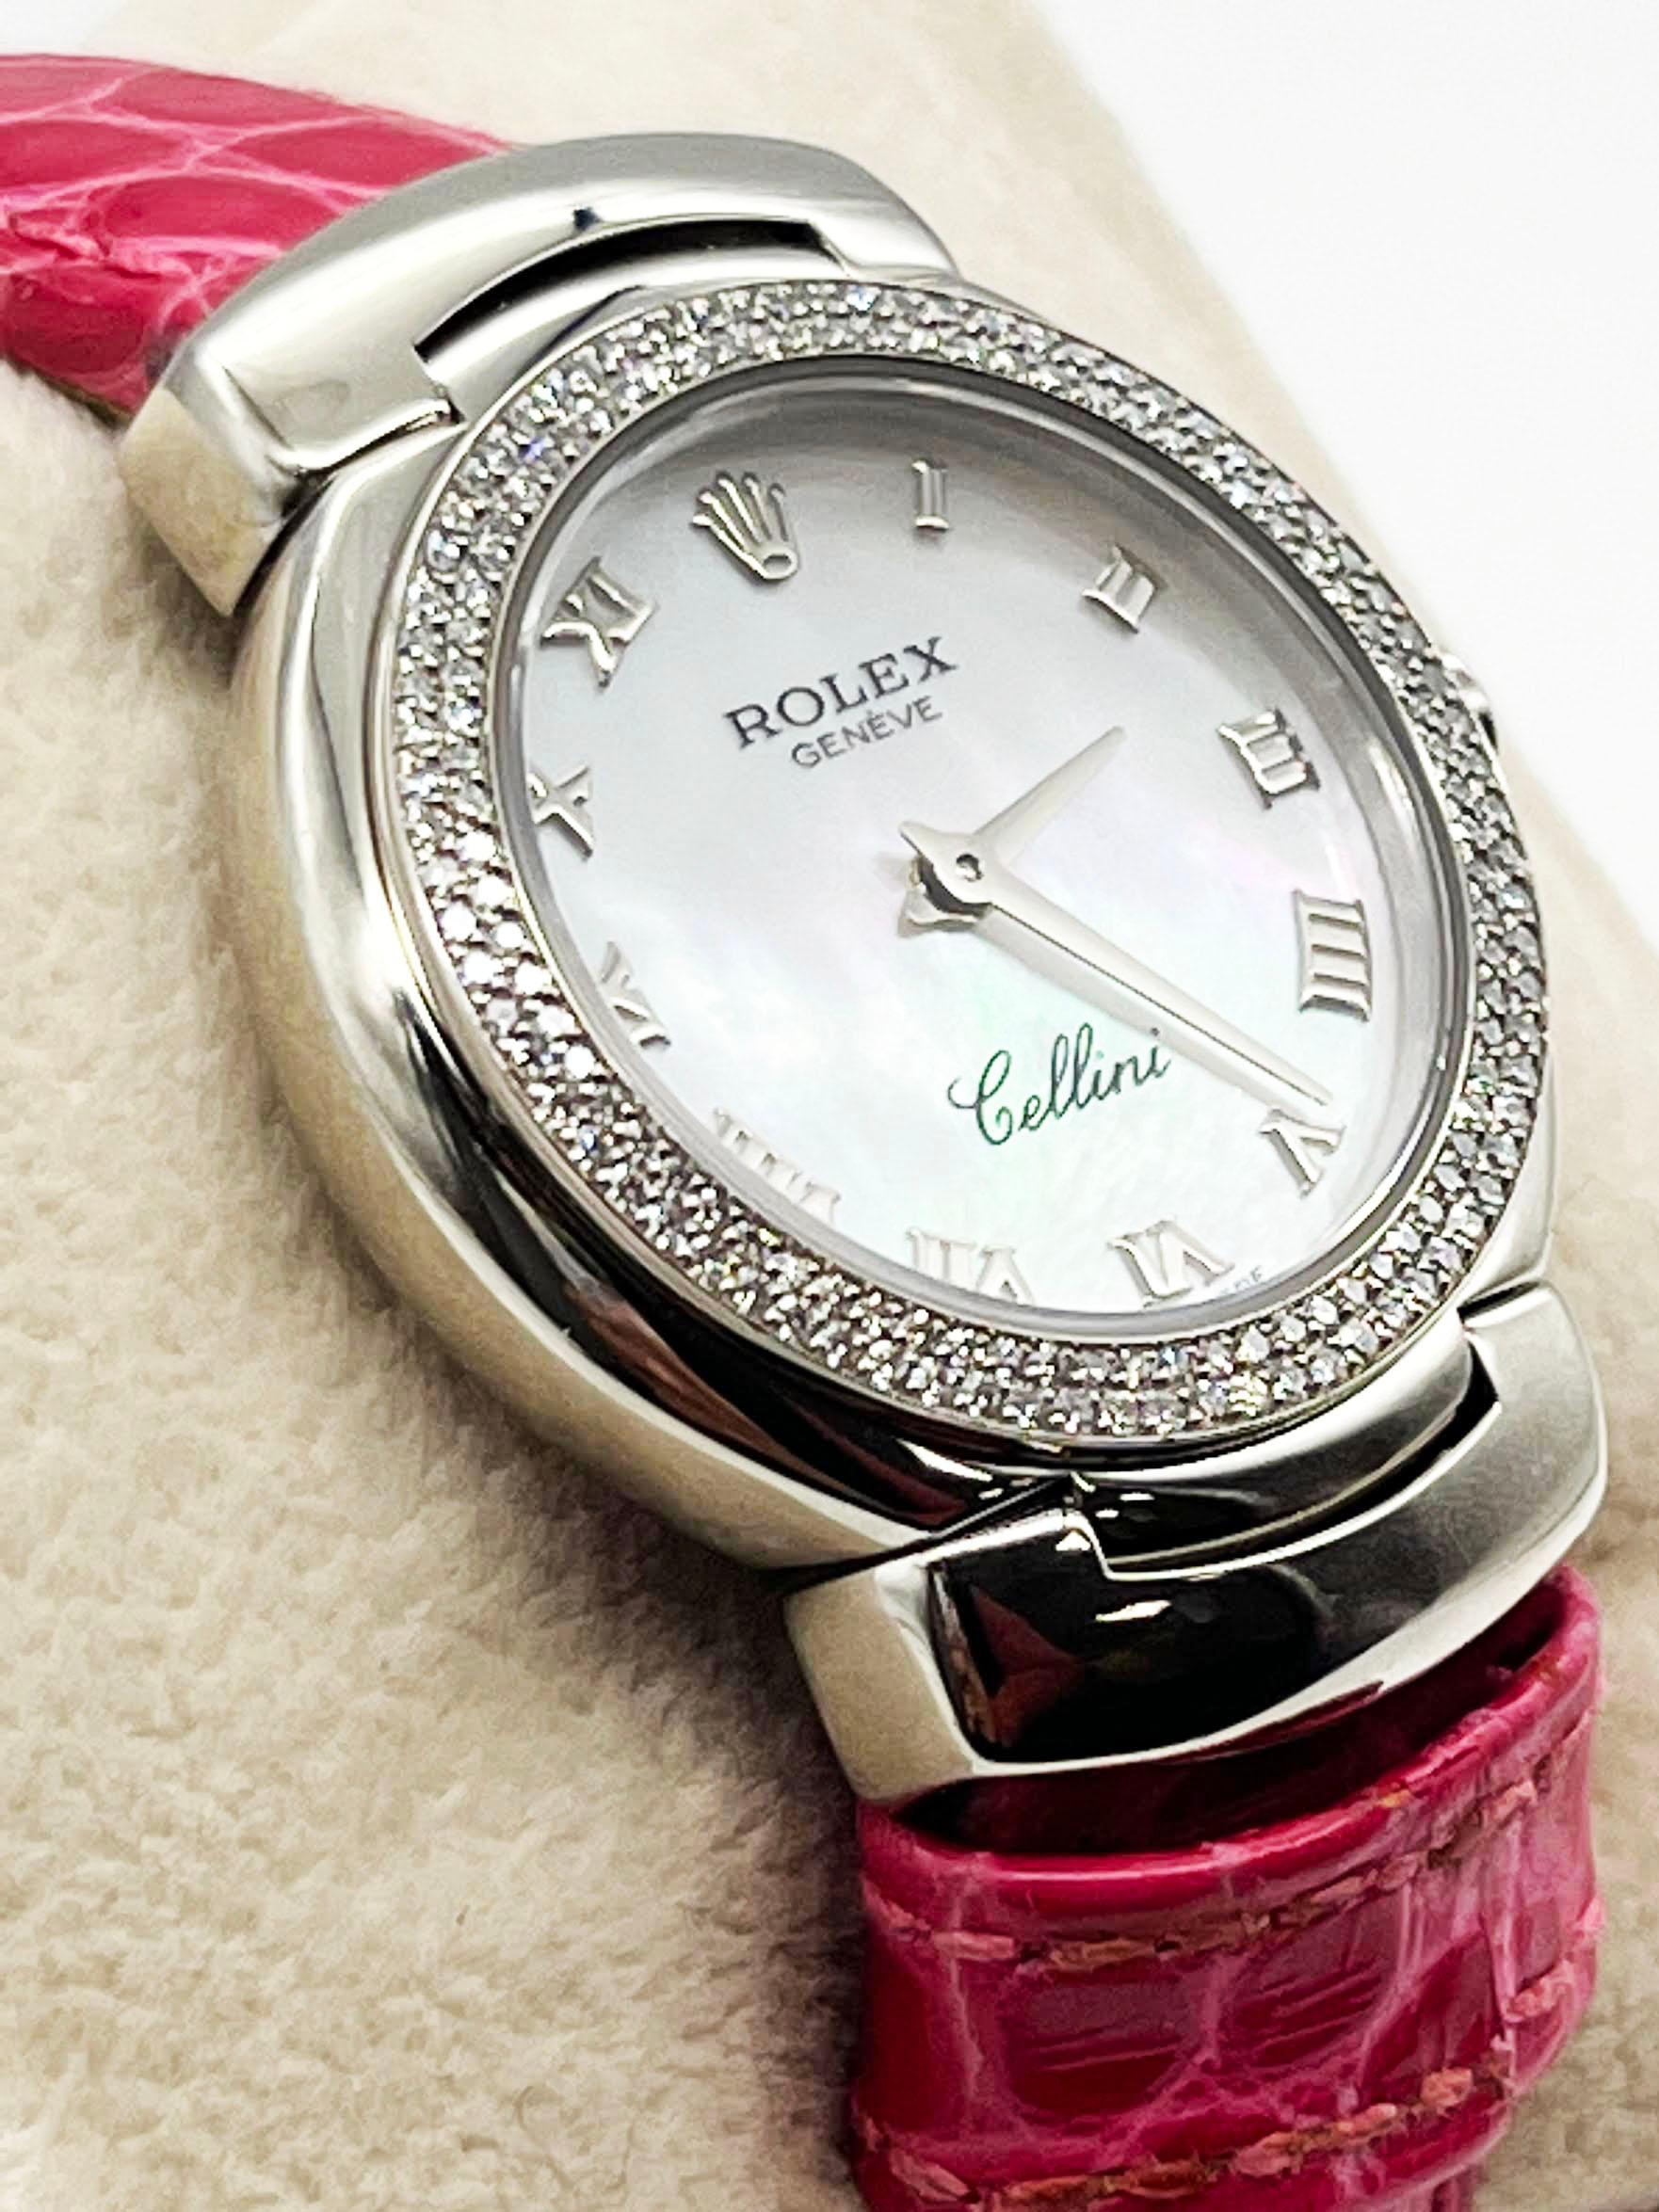 Style Number: 6671

Serial: D755***

Year: 2005

Model: Cellini Cellisma

Case Material: 18K White Gold 

Band: Pink Leather Band

Bezel: 18K White Gold

Dial: White Mother of Pearl 

Face: Sapphire Crystal 

Case Size: 26mm 

Includes: 

-Elegant